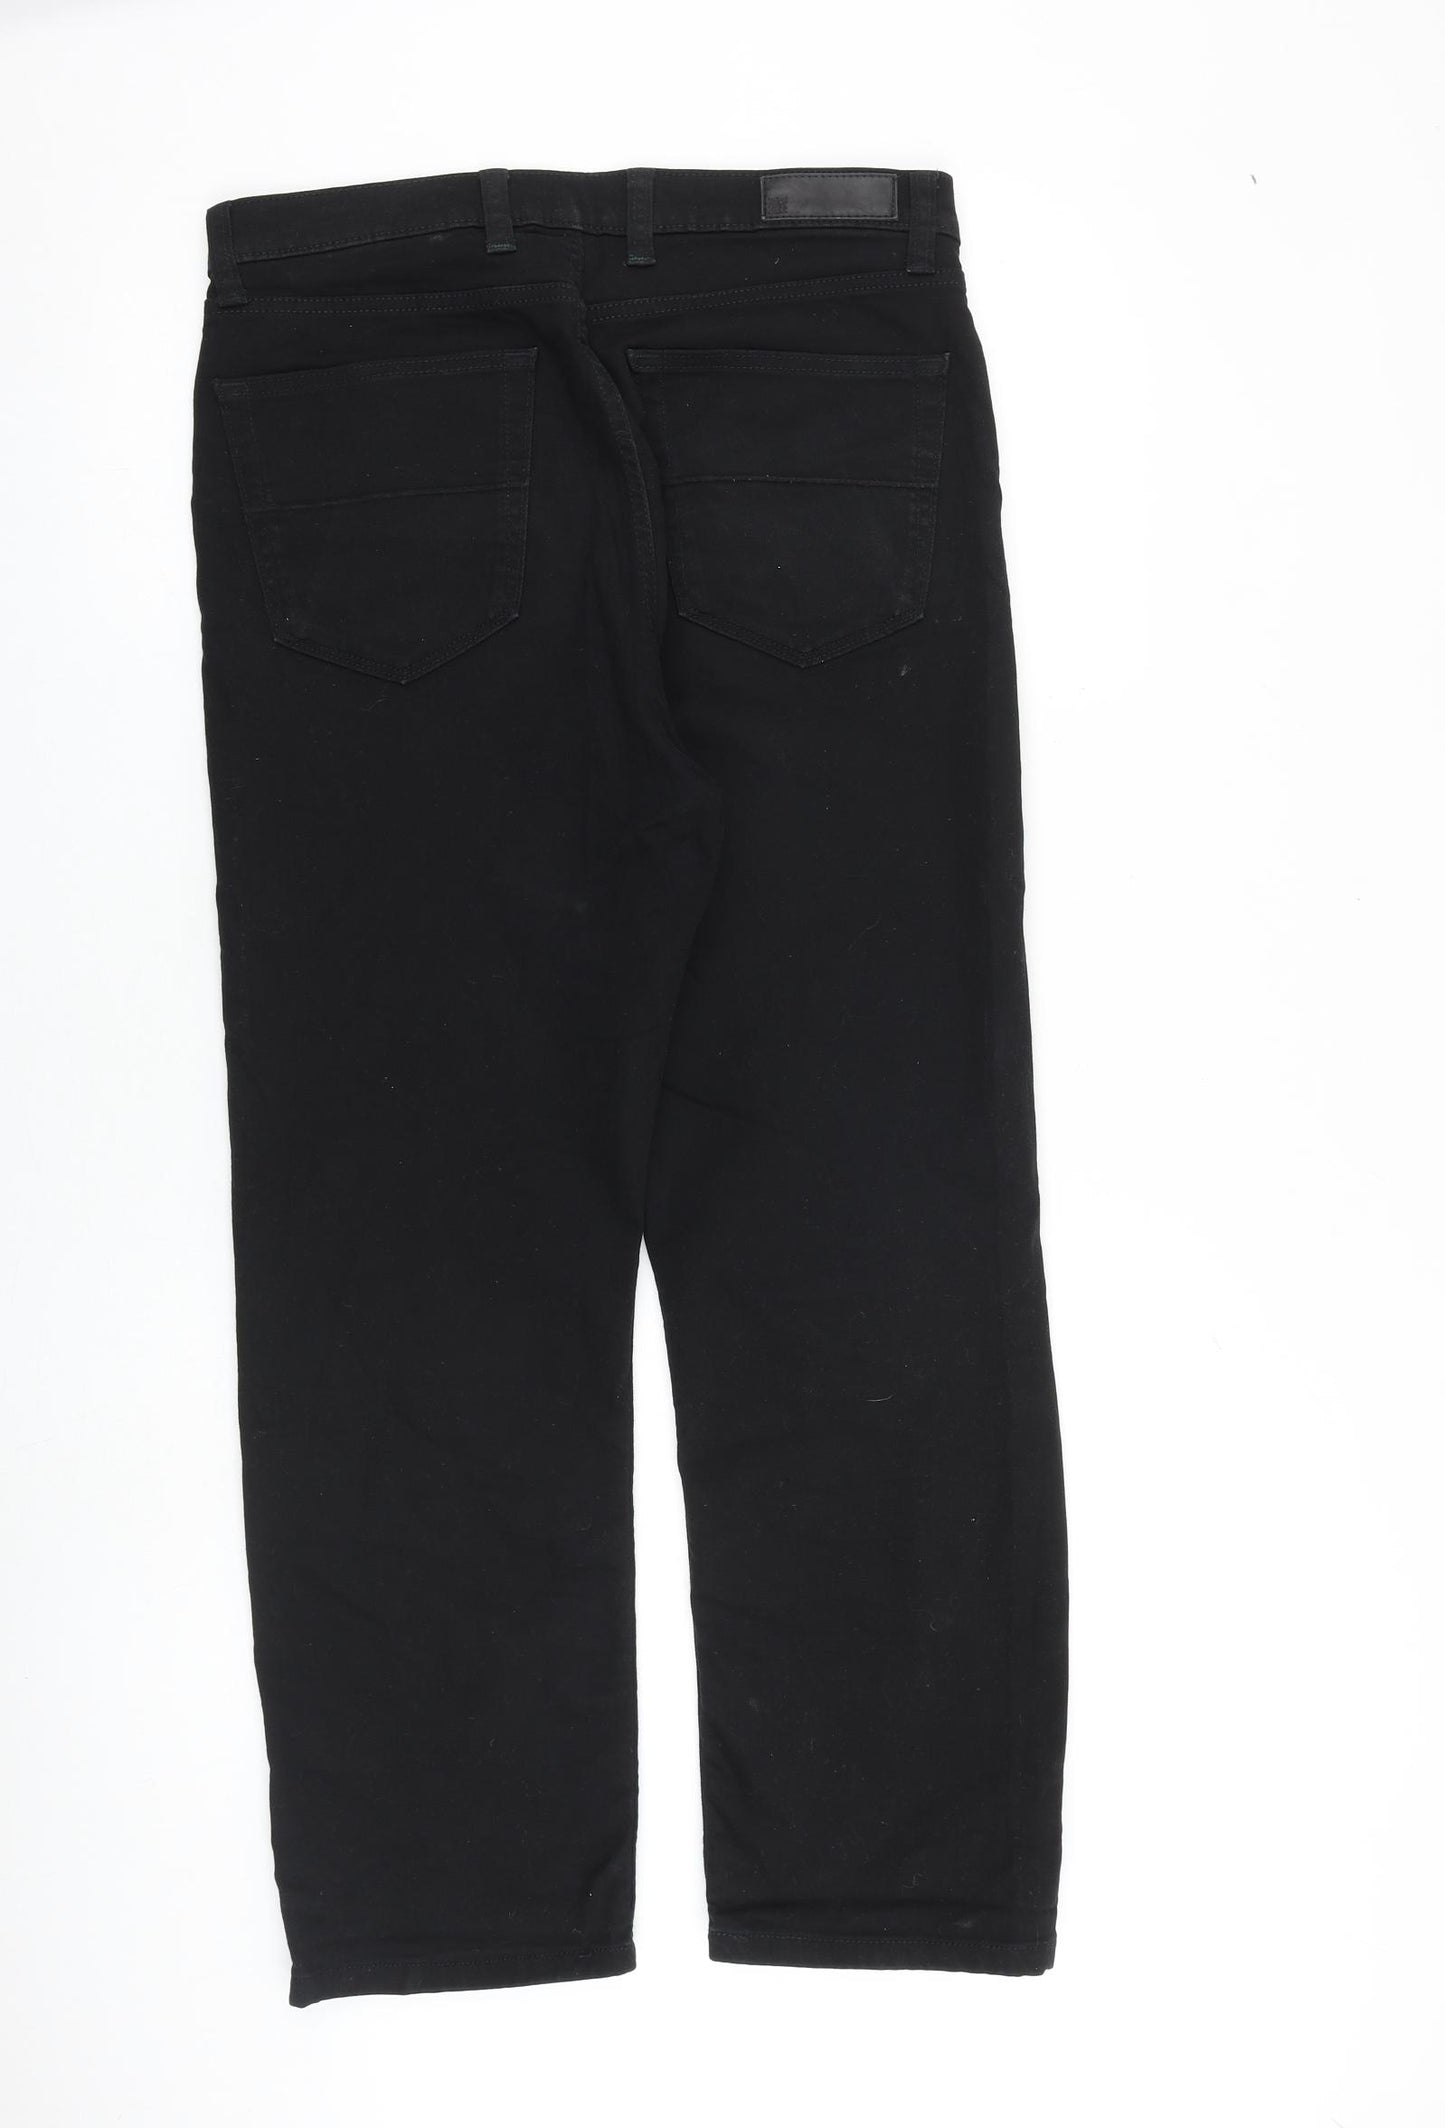 Marks and Spencer Mens Black Cotton Straight Jeans Size 32 in L29 in Regular Zip